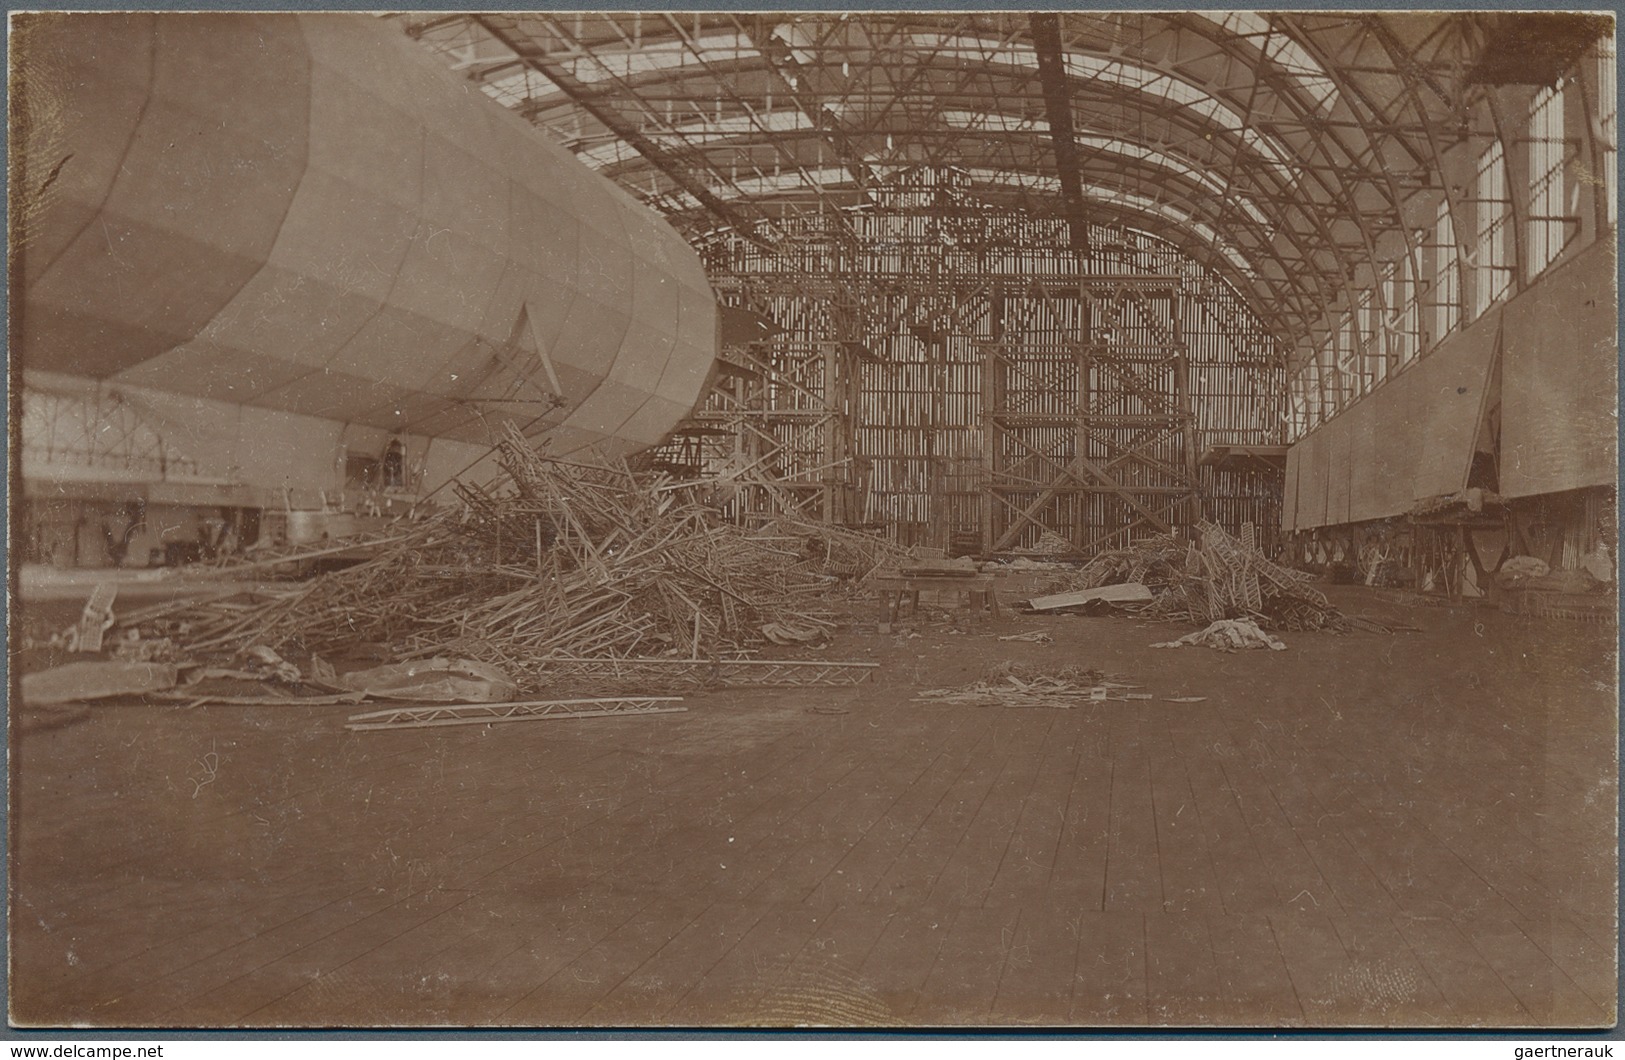 Zeppelinpost Deutschland: Over 140 Zeppelin postcards, mostly Real Photos with the largest part pion